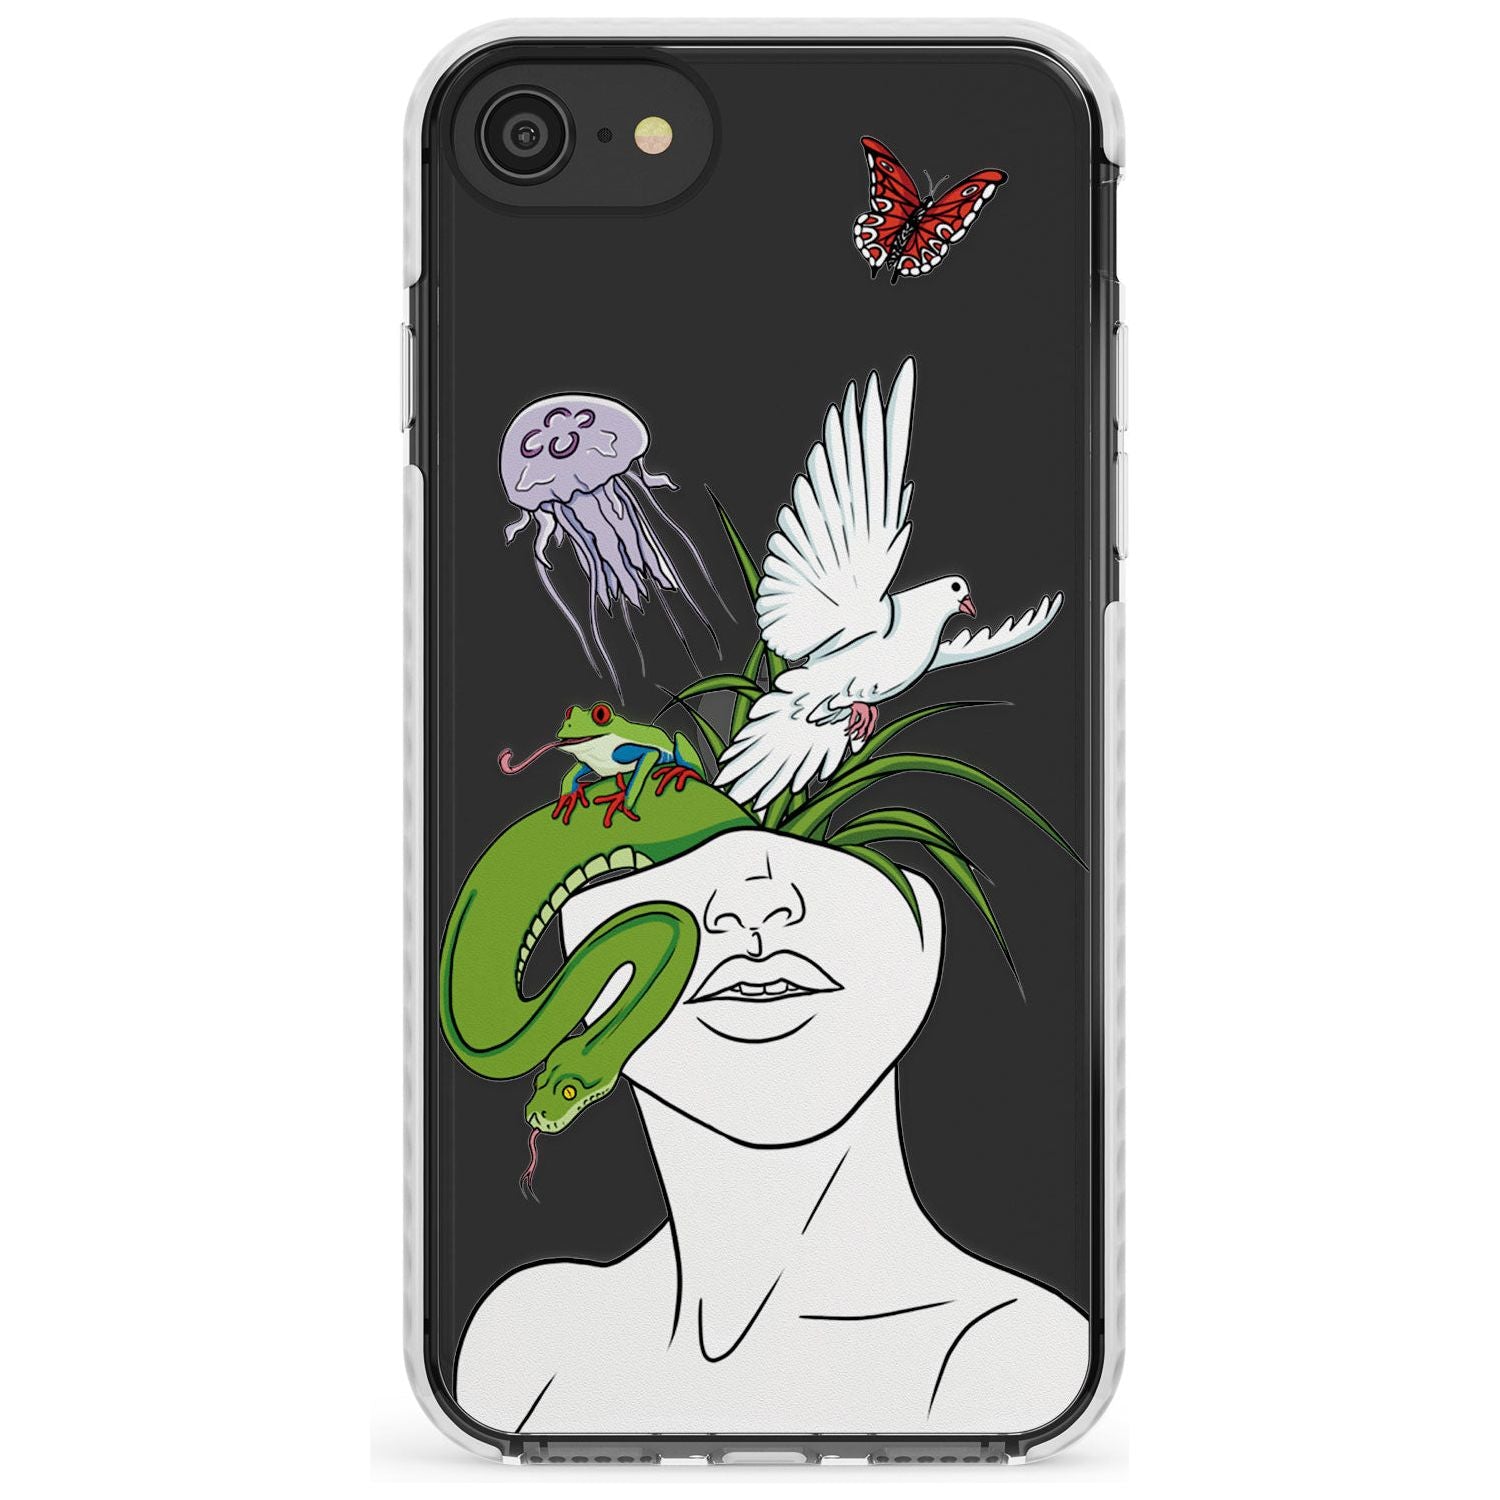 WILD THOUGHTS Slim TPU Phone Case for iPhone SE 8 7 Plus